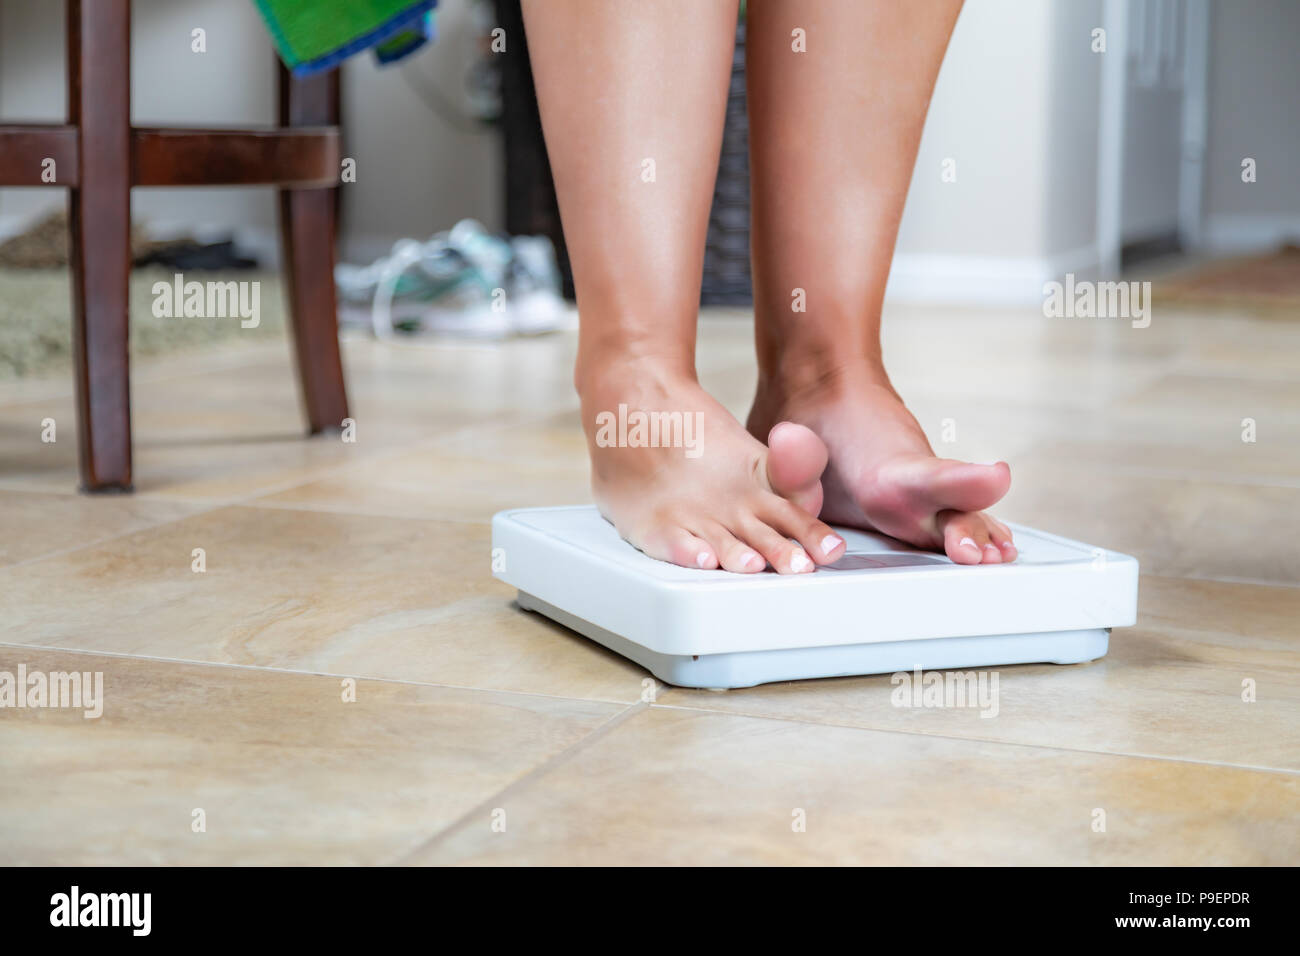 https://c8.alamy.com/comp/P9EPDR/woman-standing-on-scale-at-home-reluctantly-viewing-weight-P9EPDR.jpg